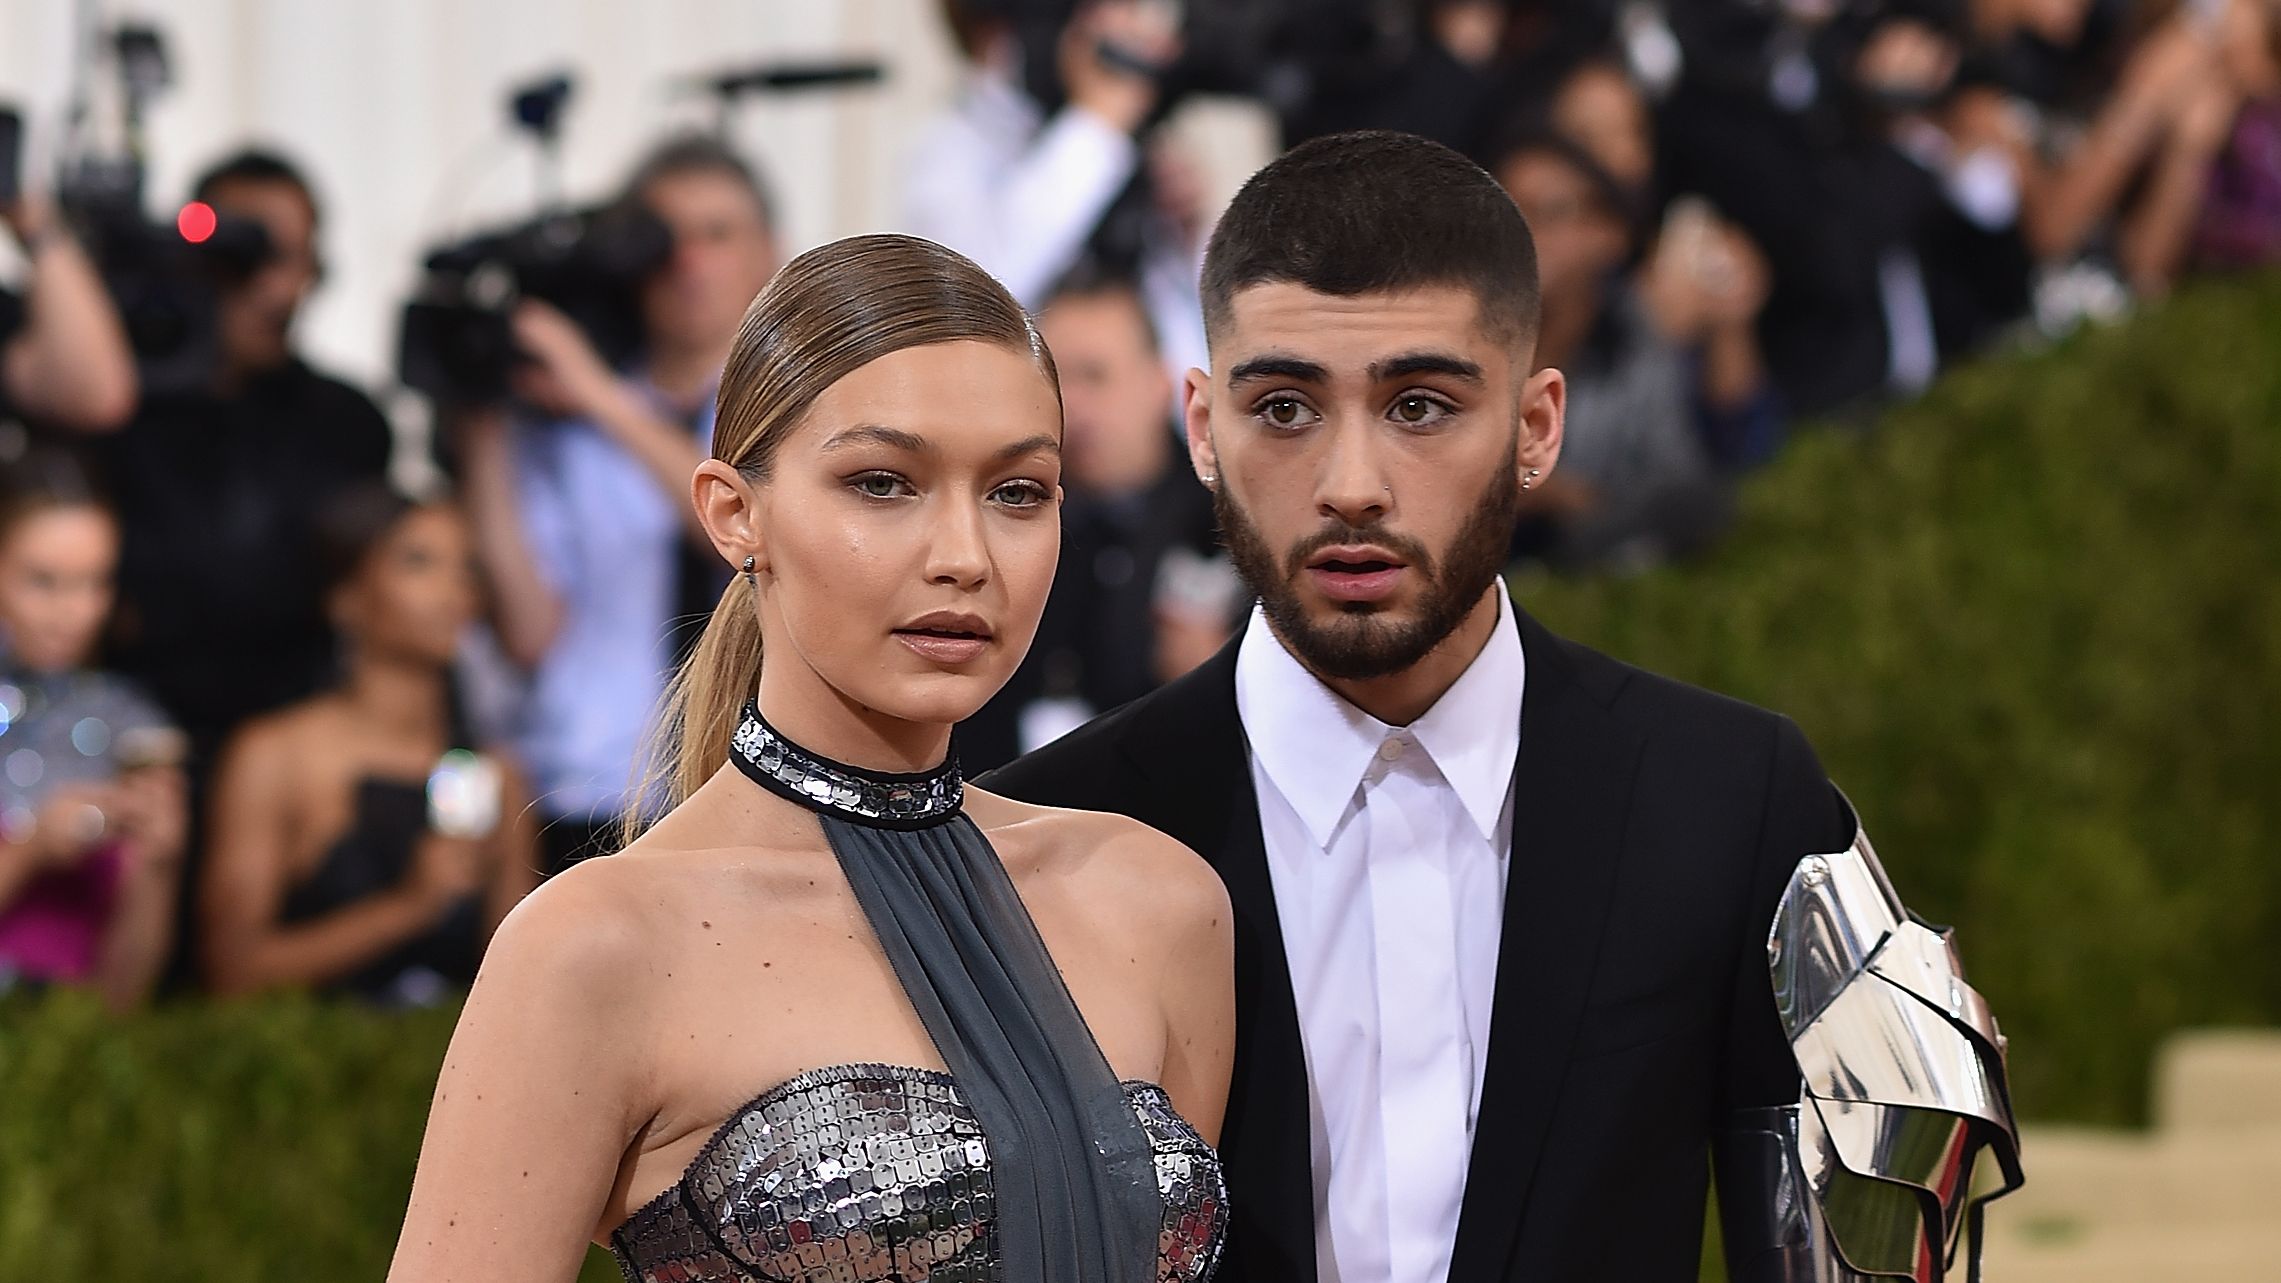 Gigi Hadid Shares Birth Story and Plans for Raising Daughter Khai in 'Vogue